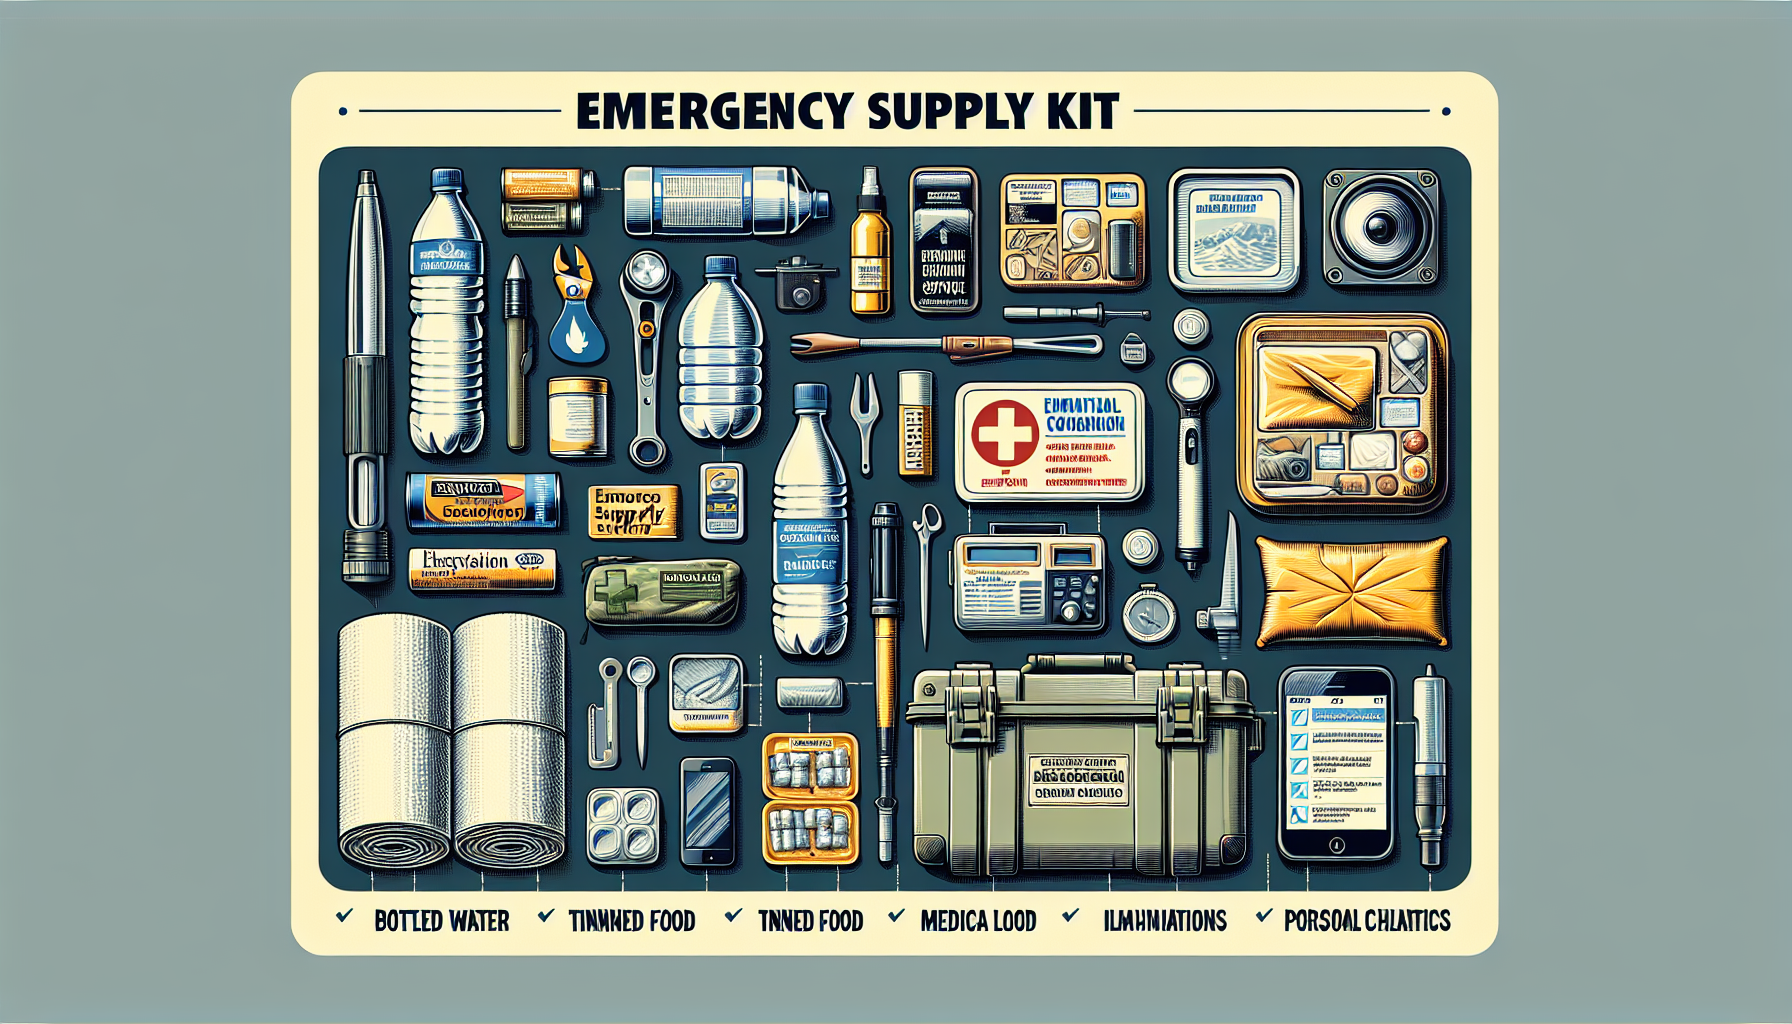 Essential Steps for Emergency Supply Kits Creation